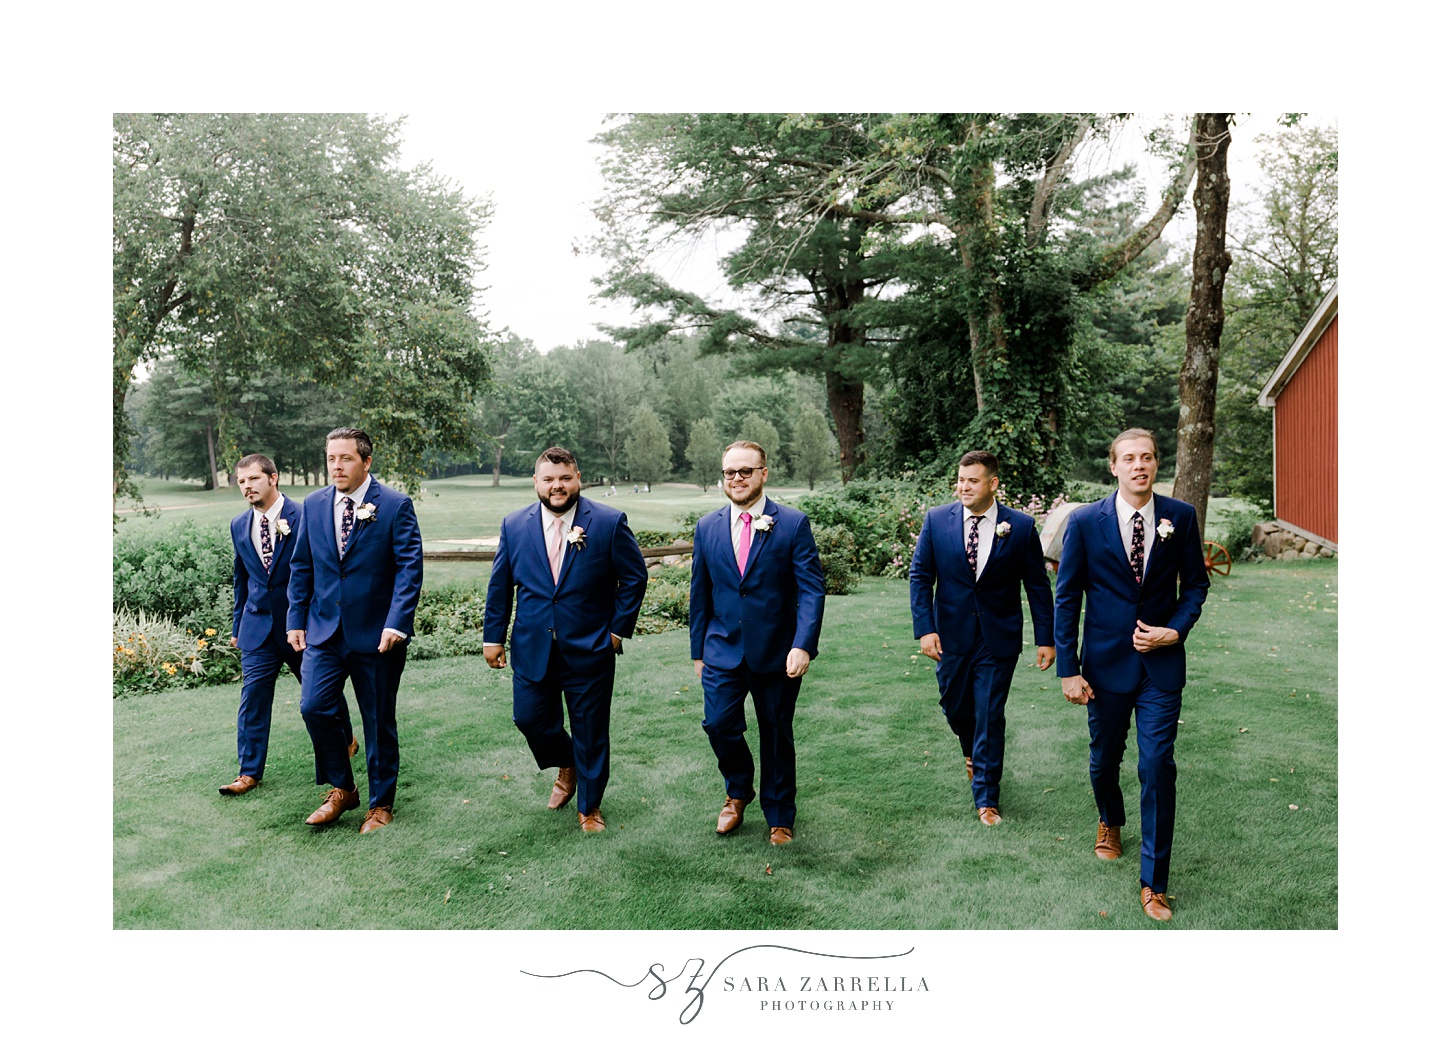 groom walks with groomsmen in navy suits on lawn at Blissful Meadows